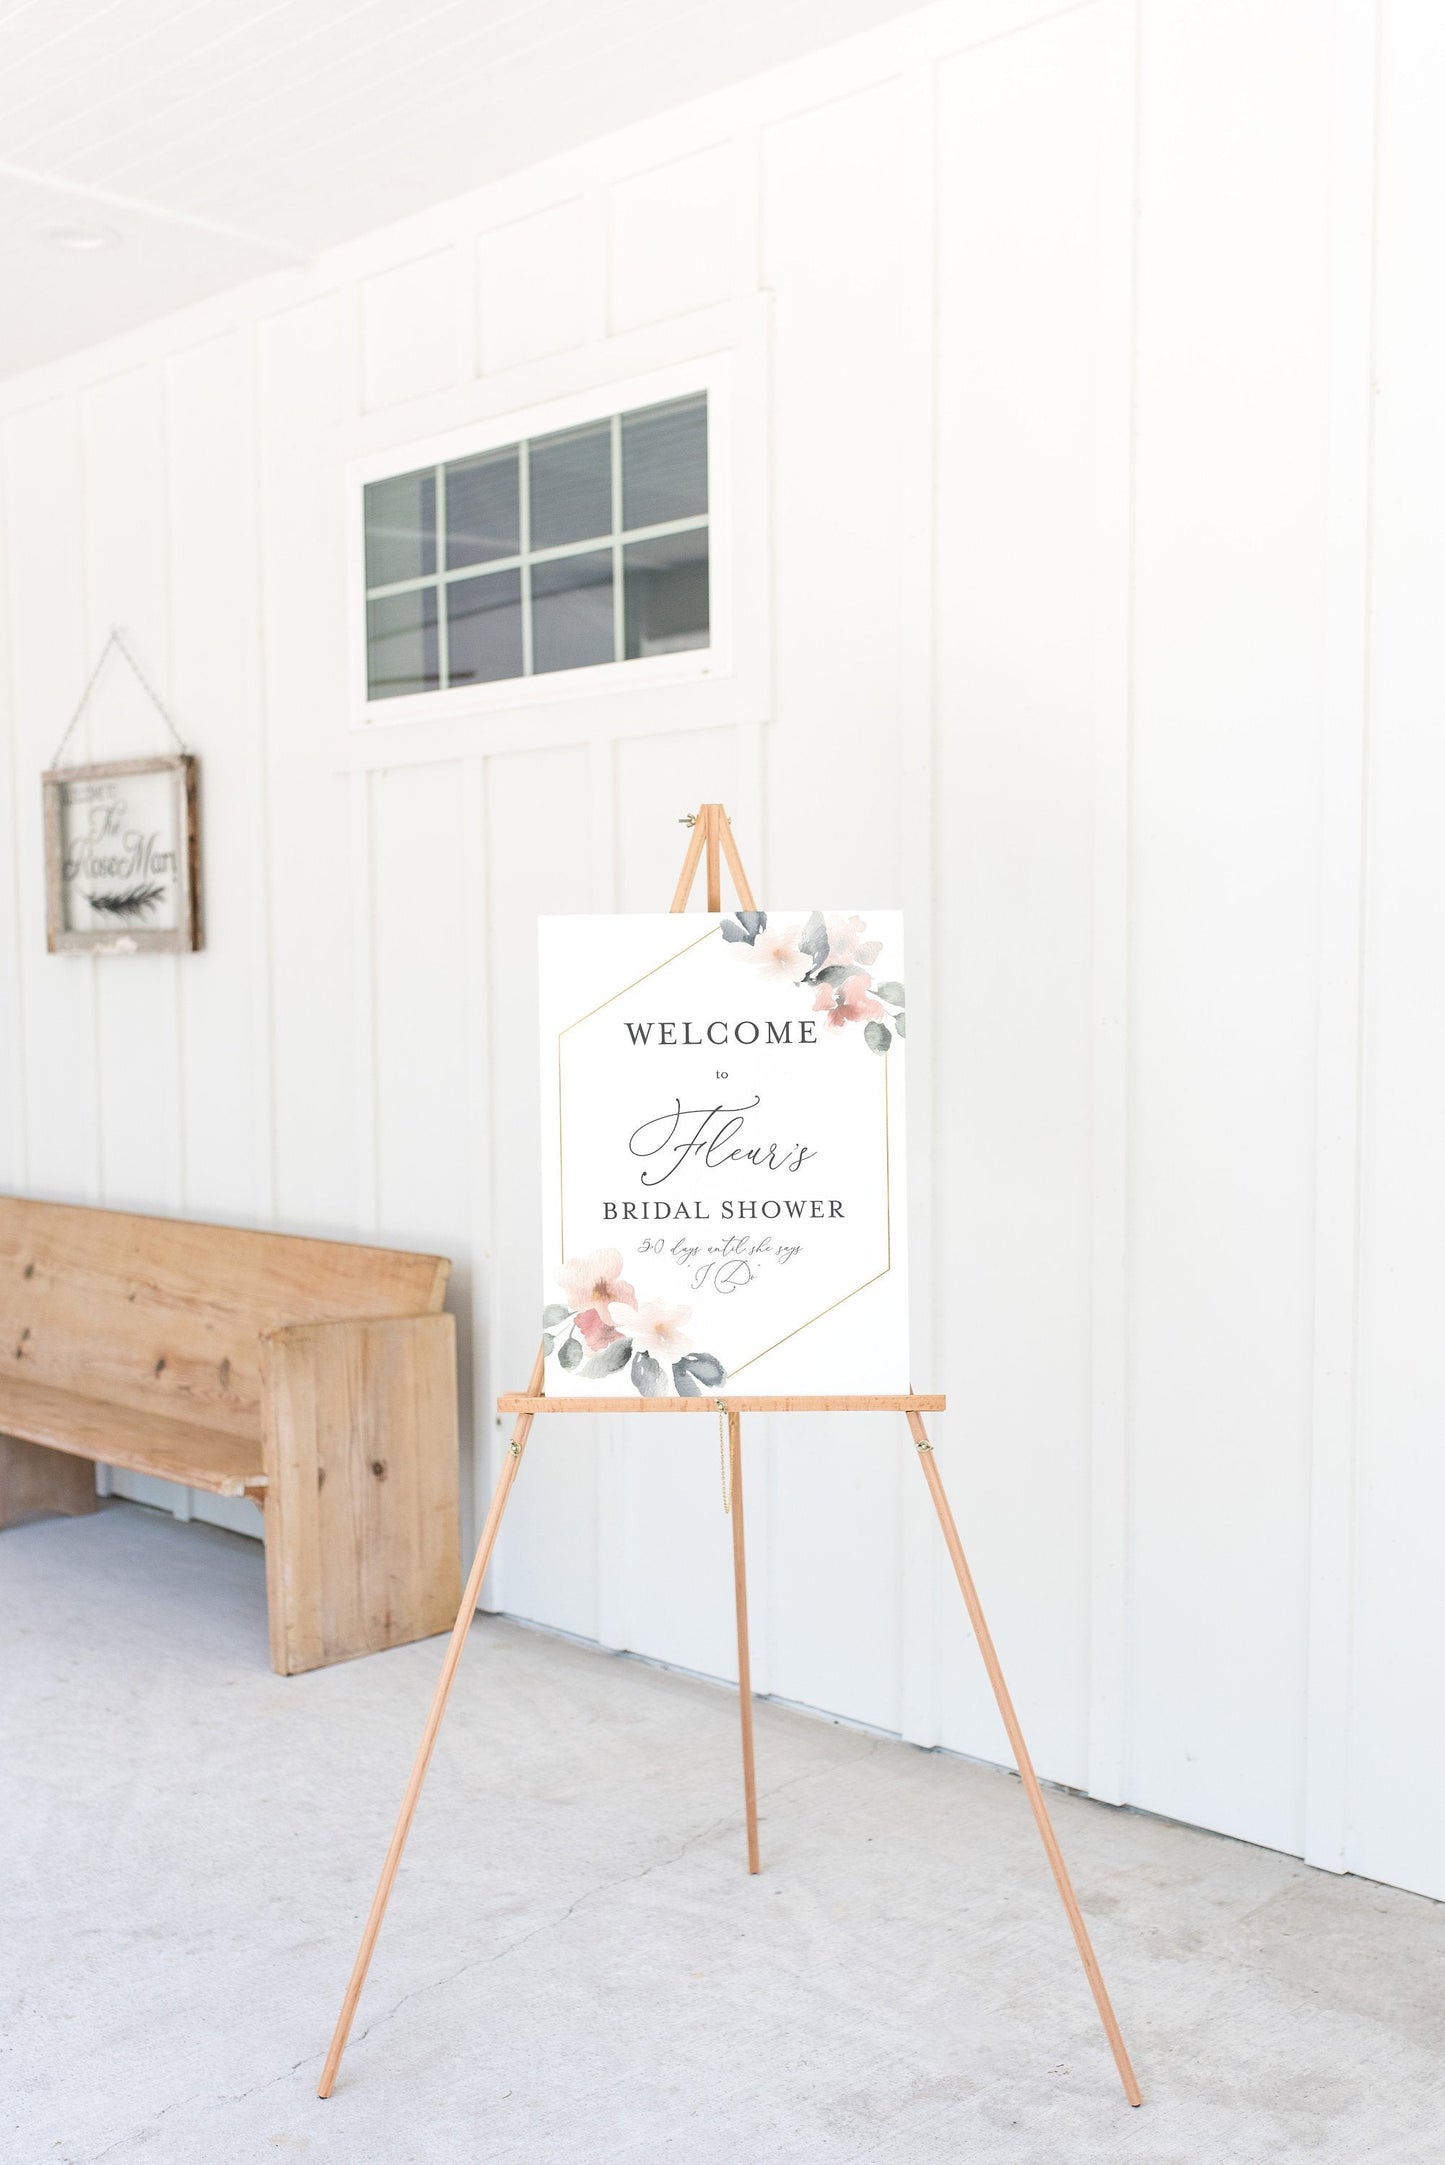 Printable  Bridal Shower Welcome Sign Template Editable Instant Download Wedding Décor - Fleur SHOWER/BACH SIGNS SAVVY PAPER CO